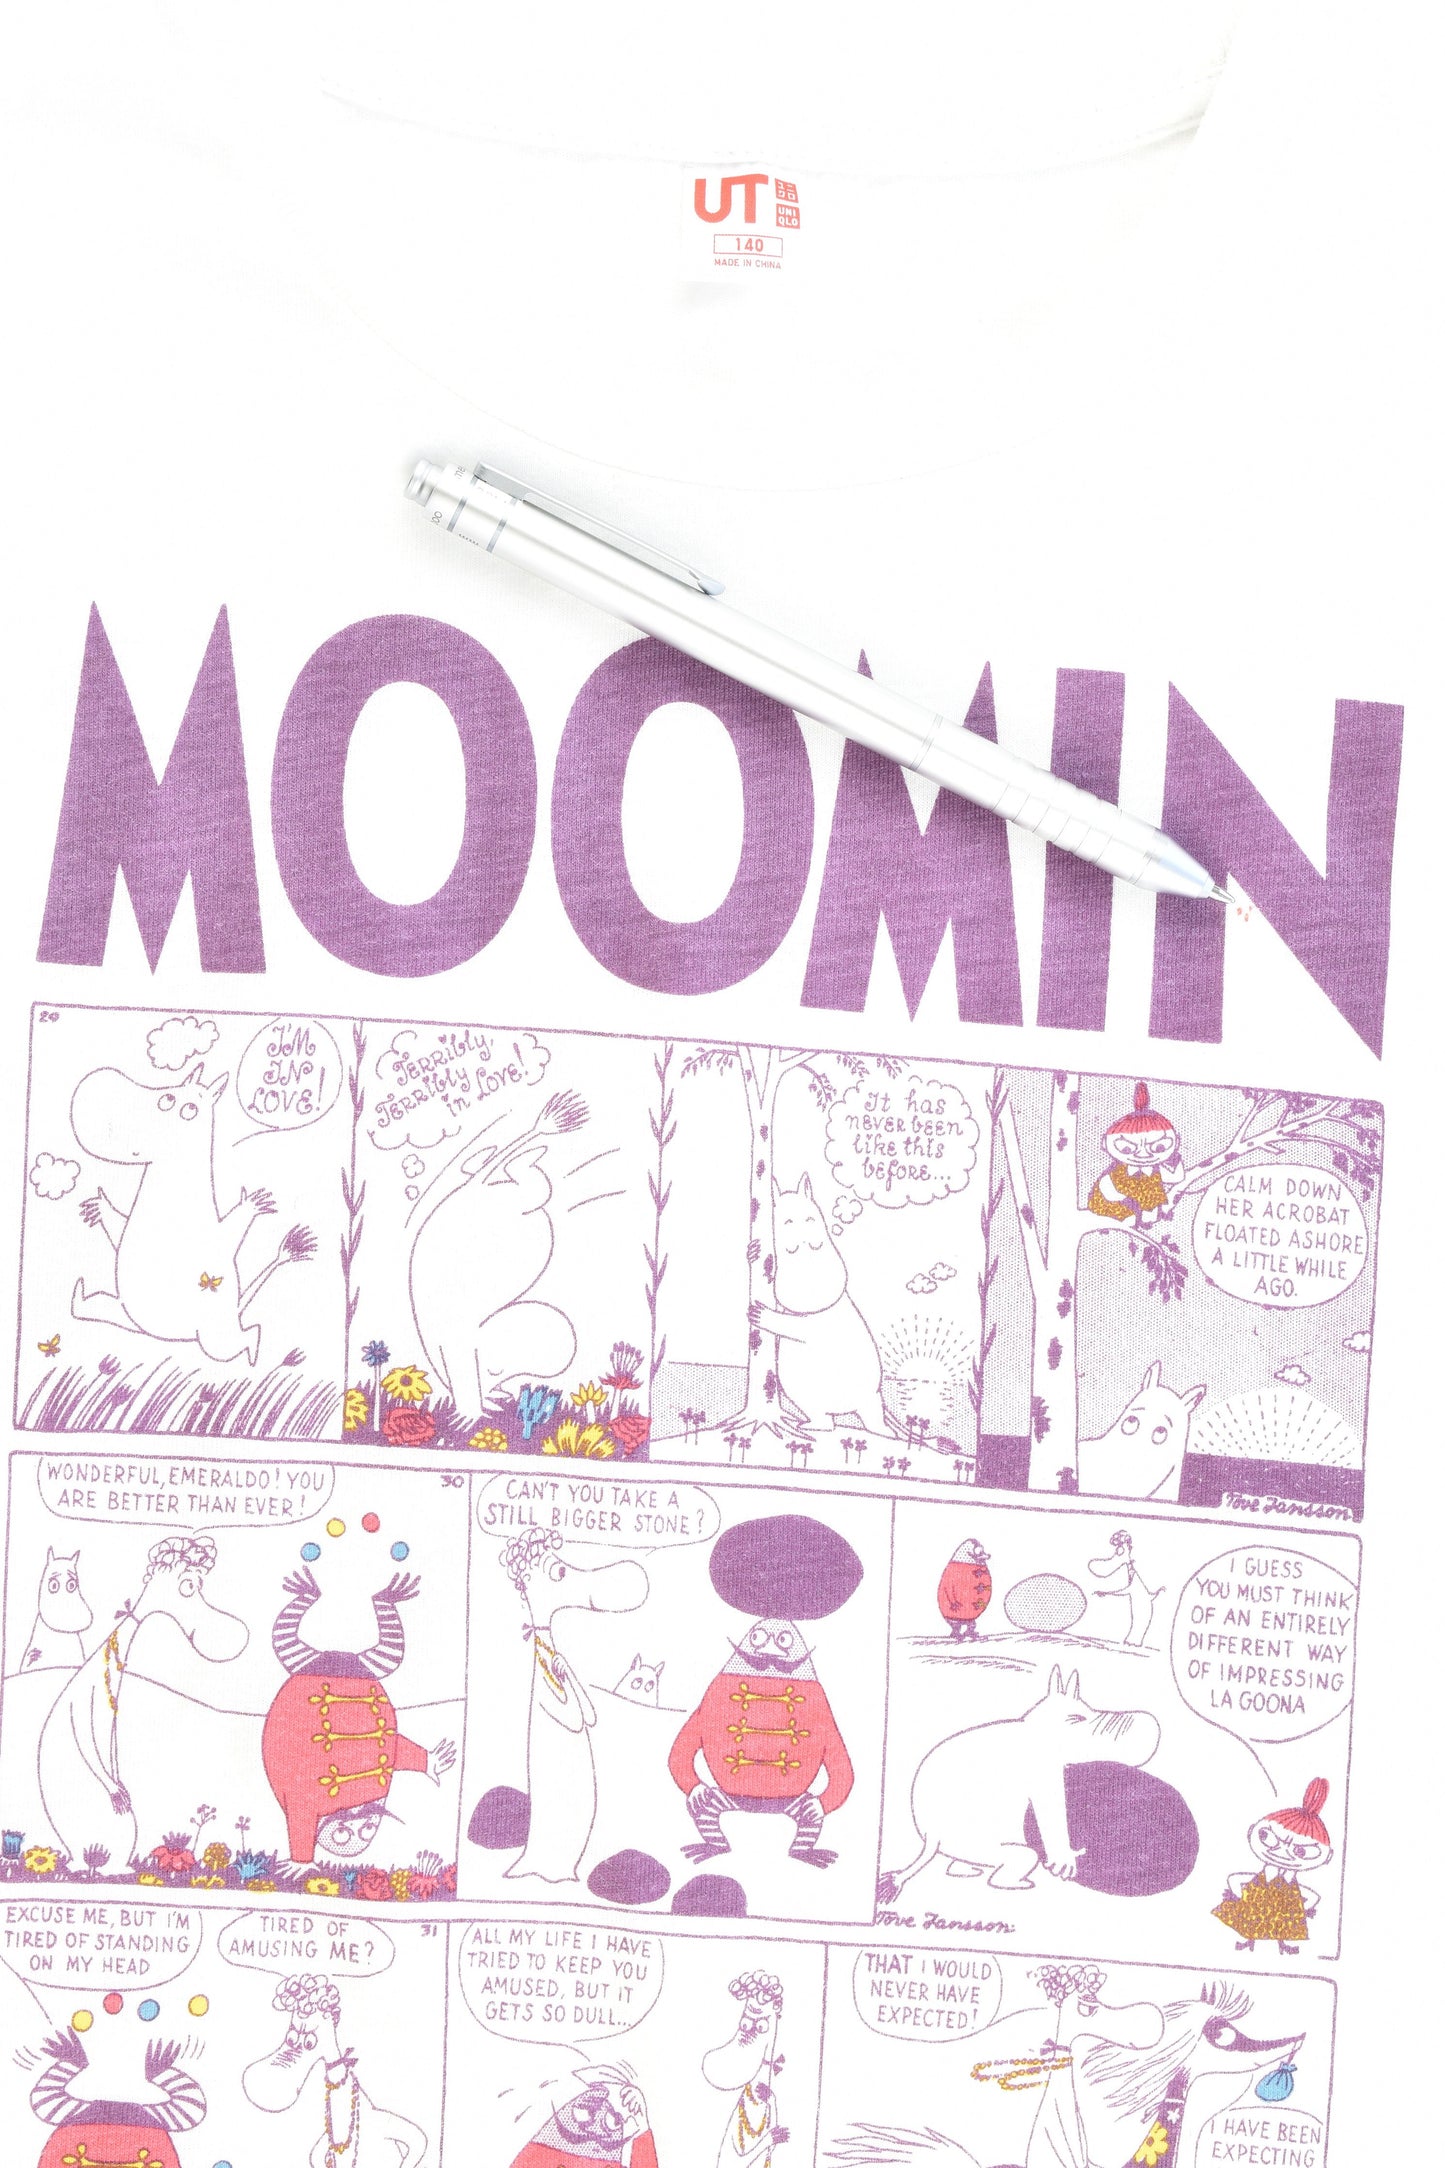 Uniqlo Size approx 8-10 (140 cm) Moomin T-shirt